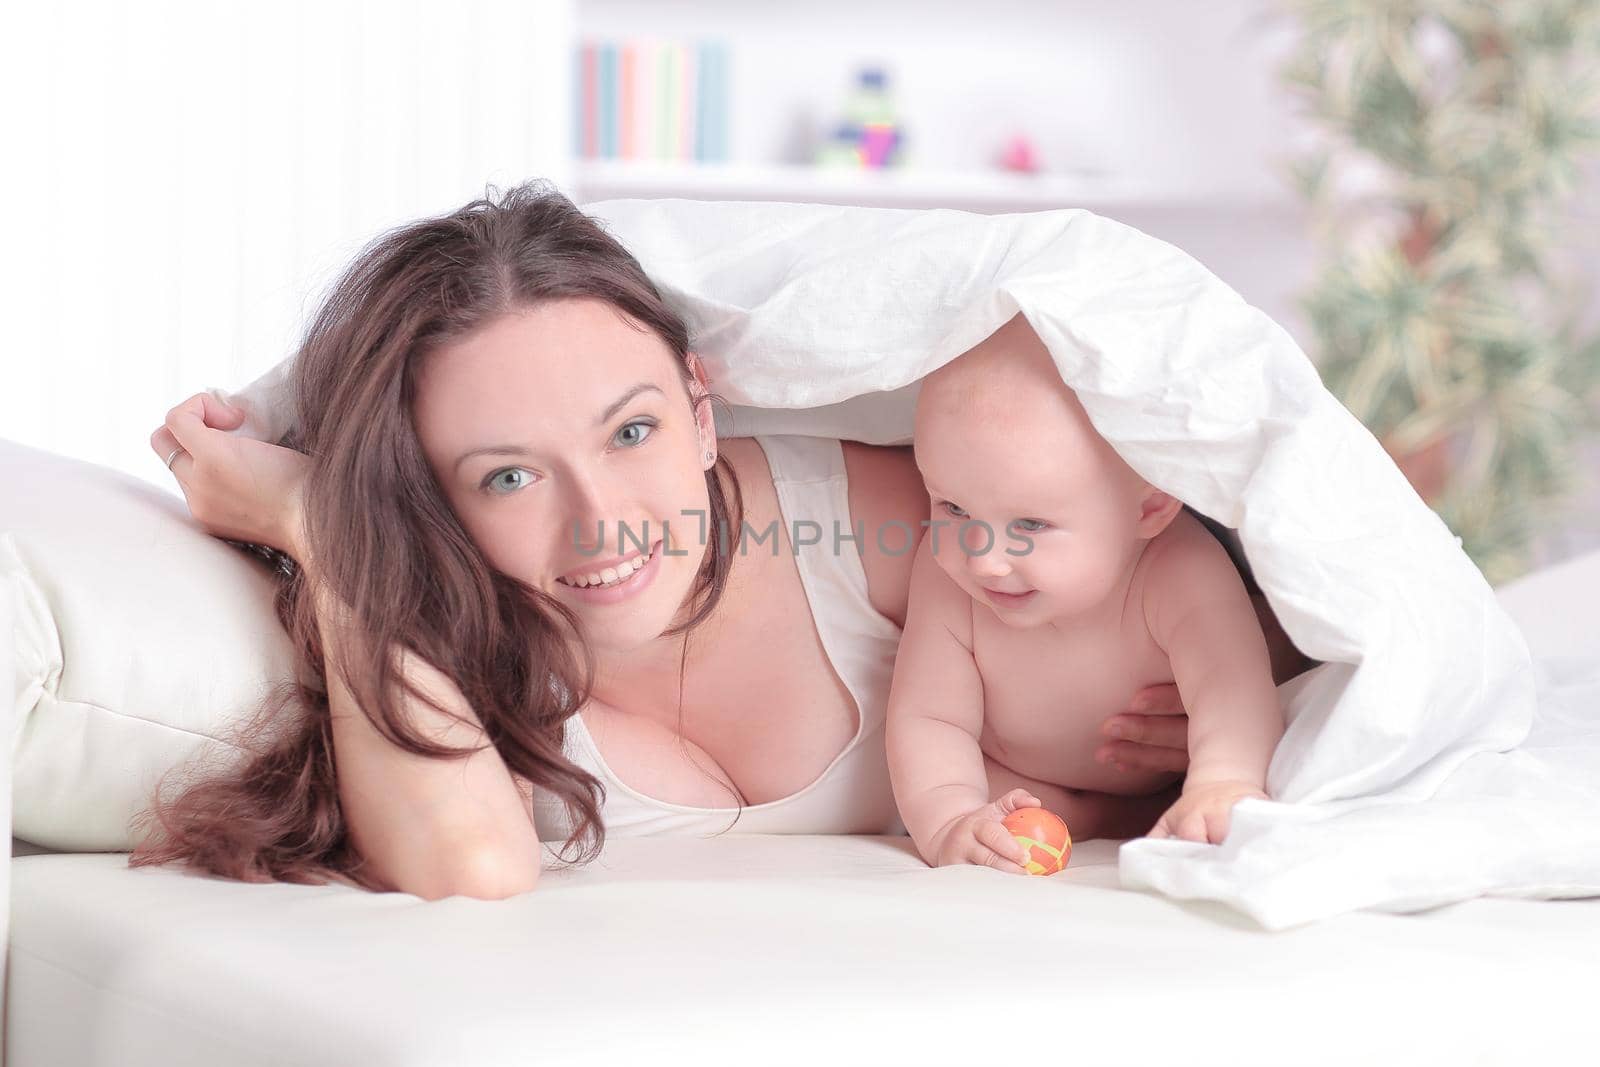 mom plays with the baby lying on the bed by SmartPhotoLab